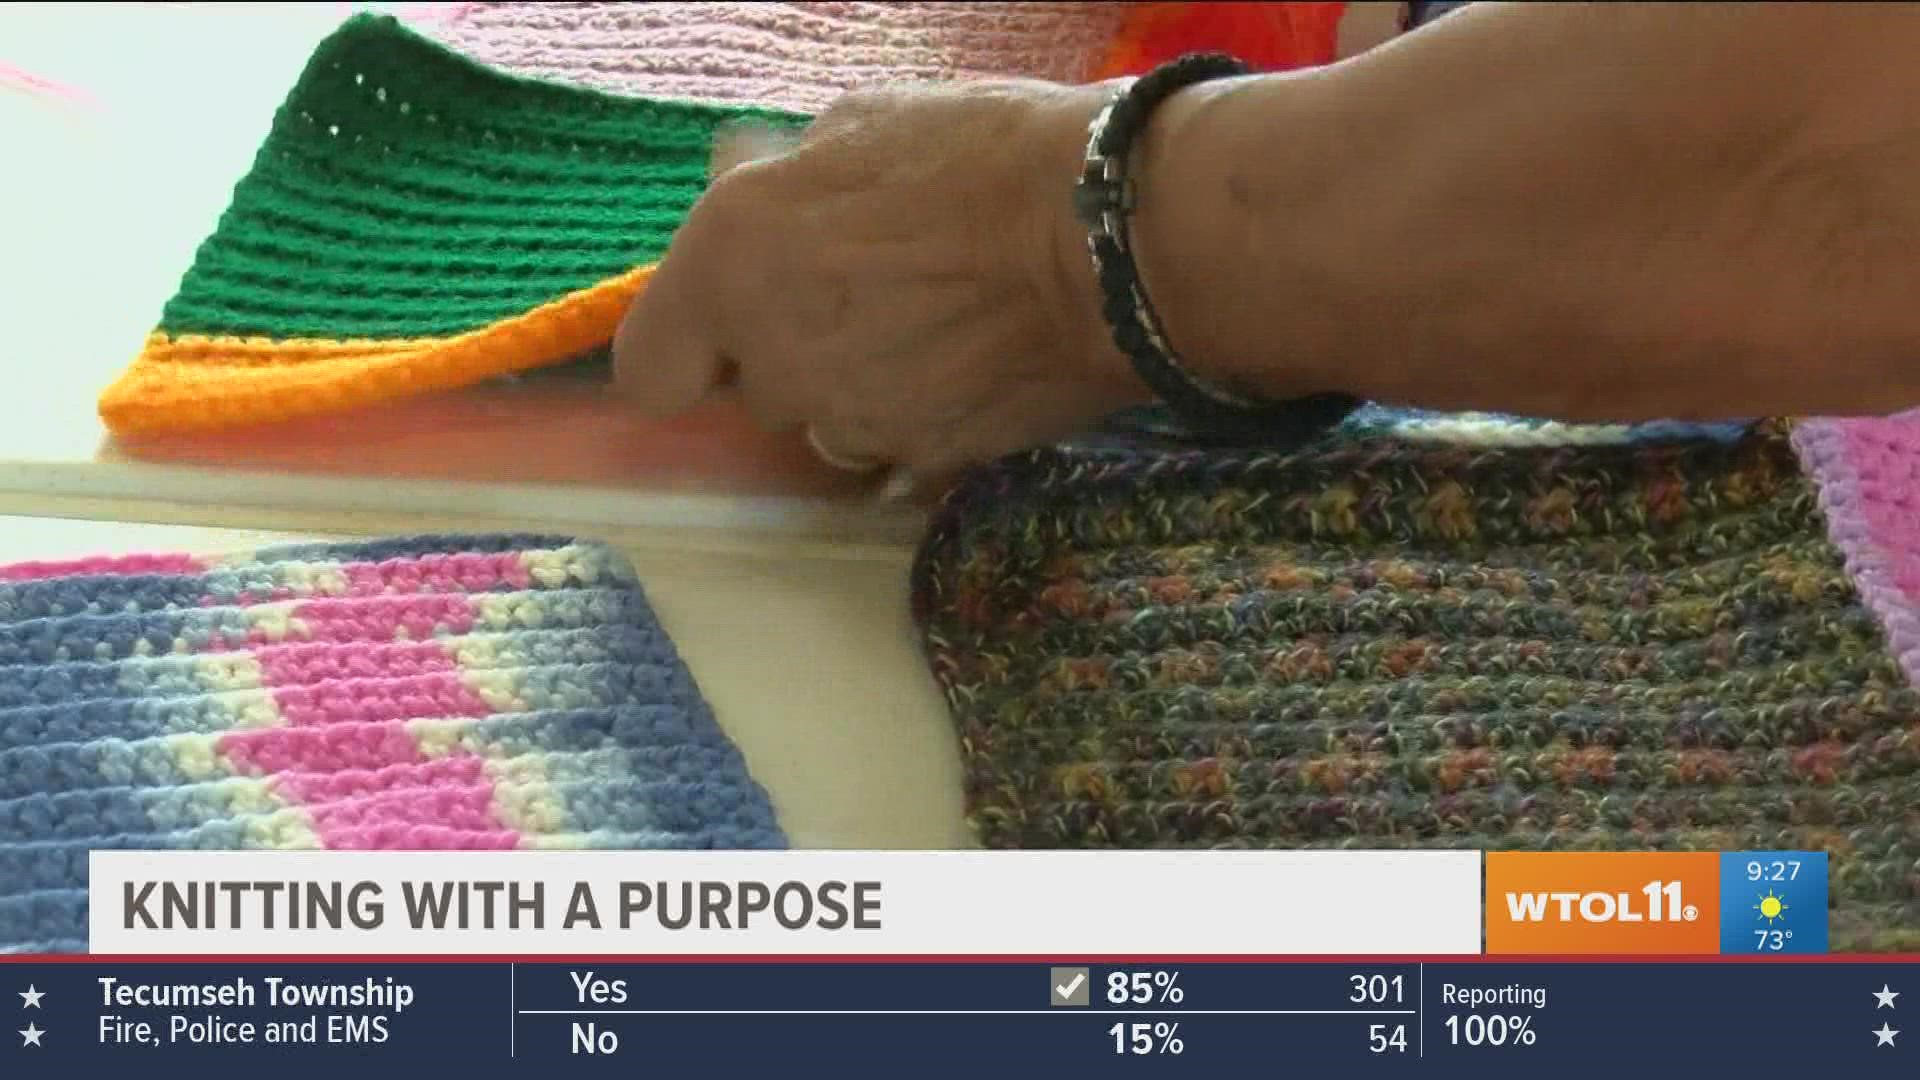 A knitting club at the Holy Trinity Greek Orthodox Cathedral finds community in their knitting club. The quilts they create are donated to an assisted living home.